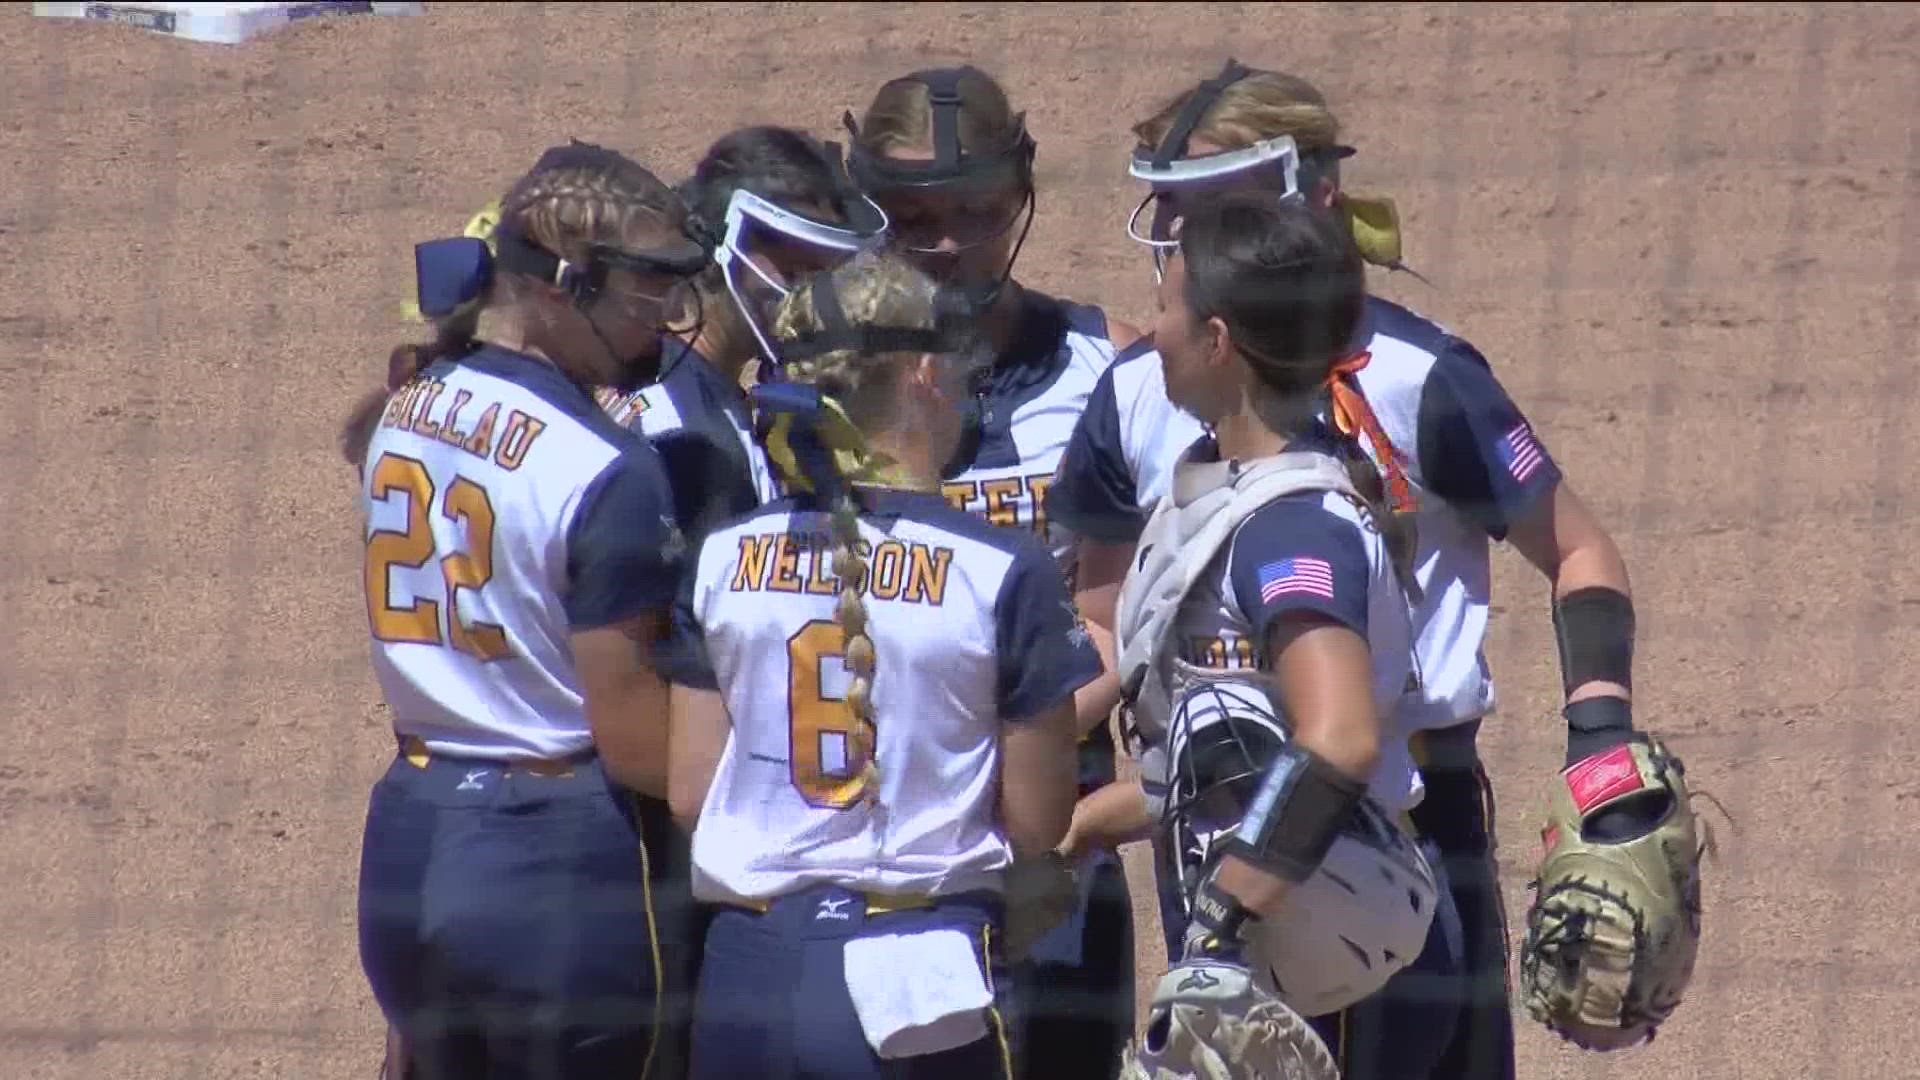 The Bobcats rolled to a 10-0 win over Mount Pleasant Sacred Heart to advance to Saturday's state title game.